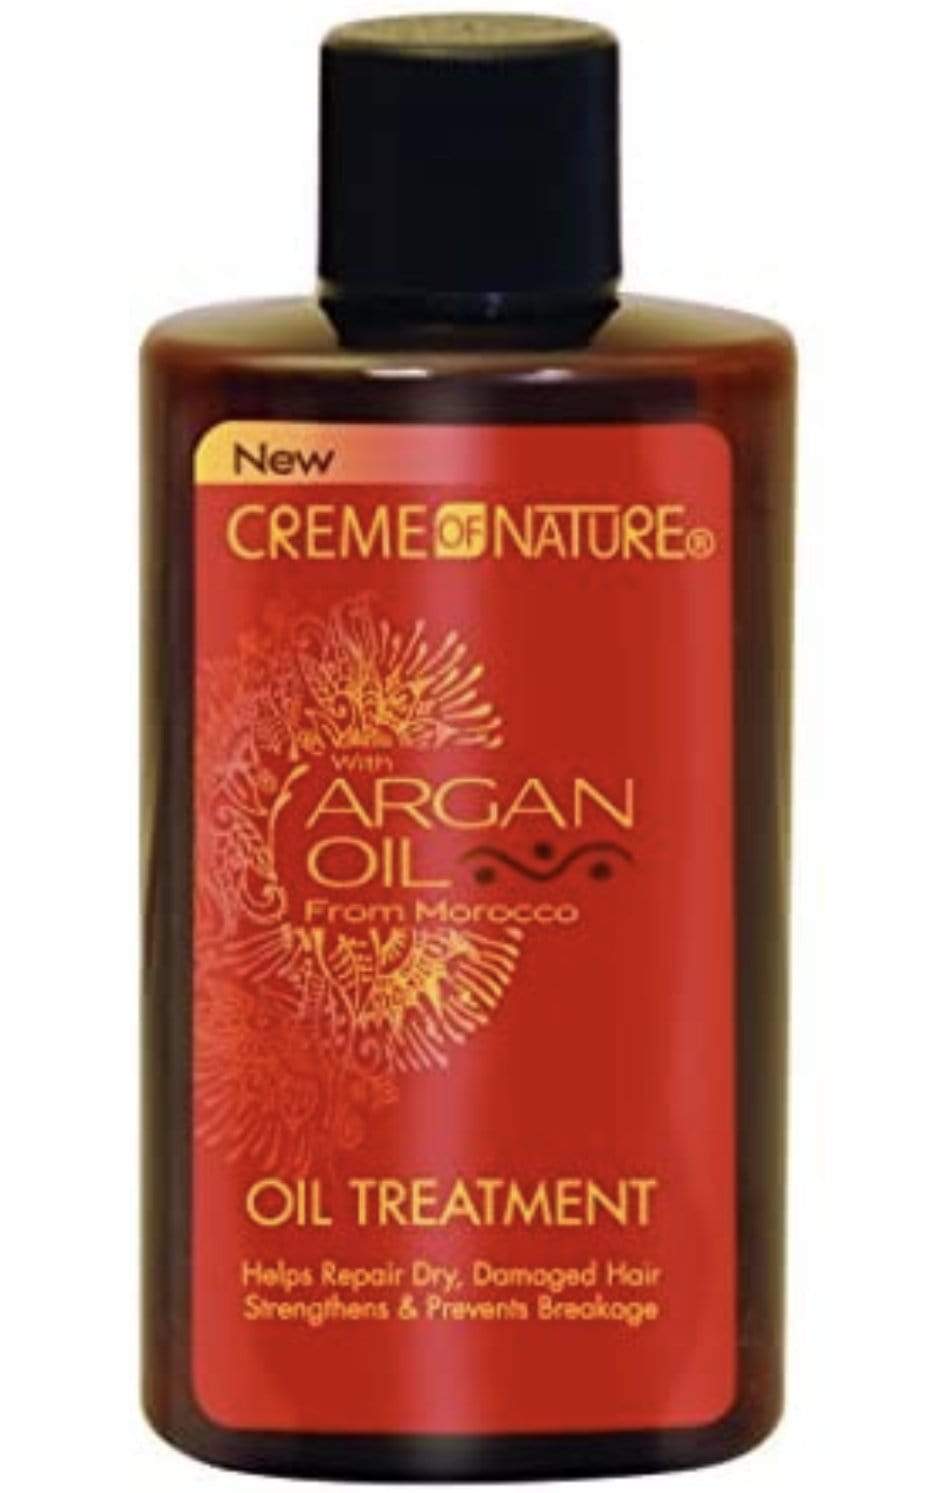 Creme of Nature - Argan oil - Hair treatment with argan oil "oil treatment" - 90 ml - Creme Of Nature - Ethni Beauty Market